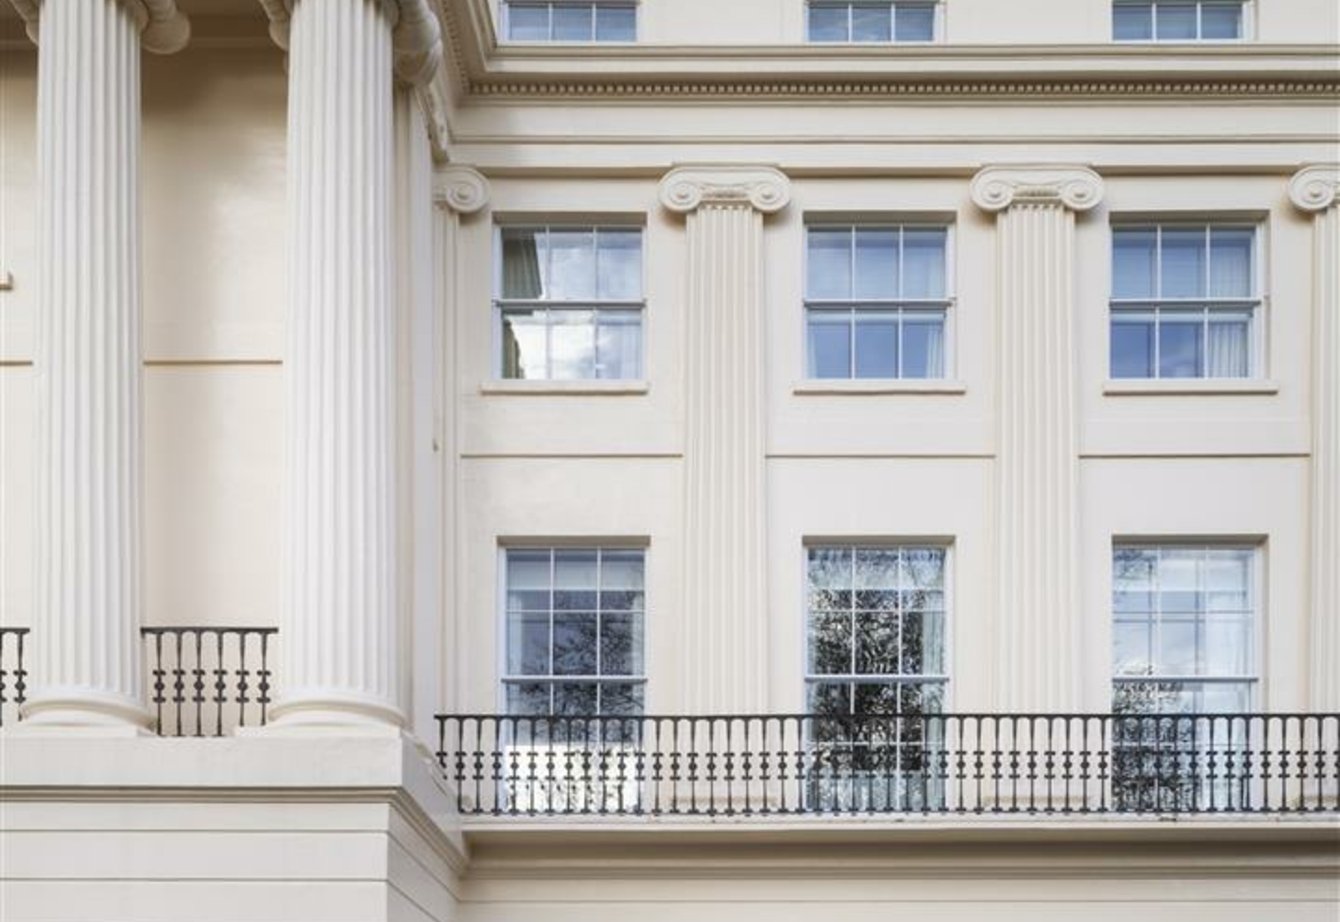 for-sale-cumberland-terrace-london-425-view1